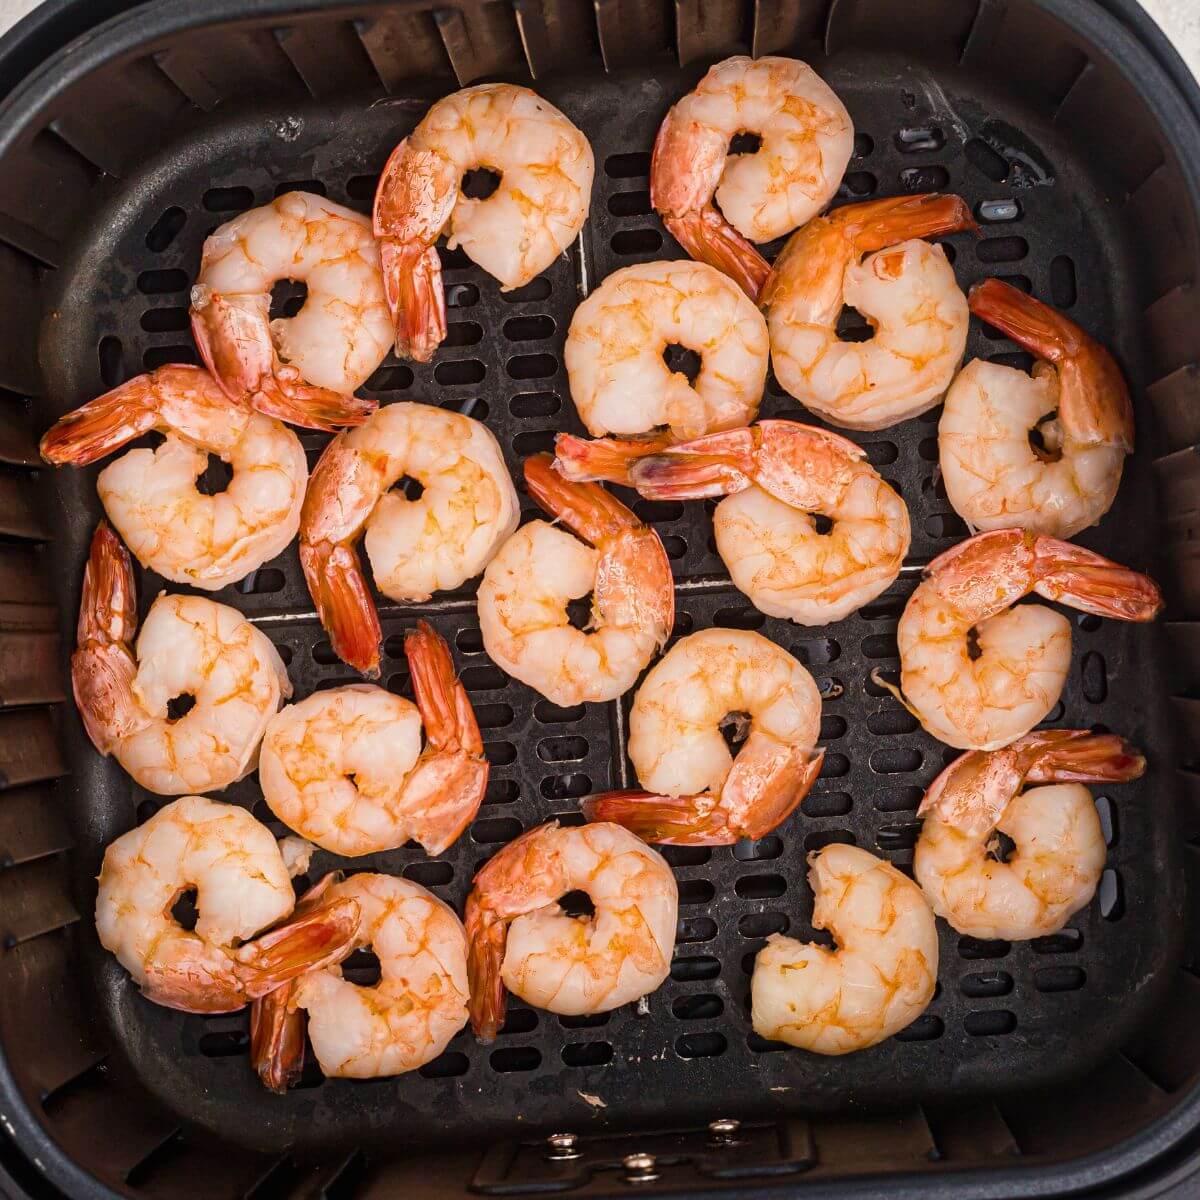 Juicy orange shrimp in the air fryer basket after being cooked from frozen.